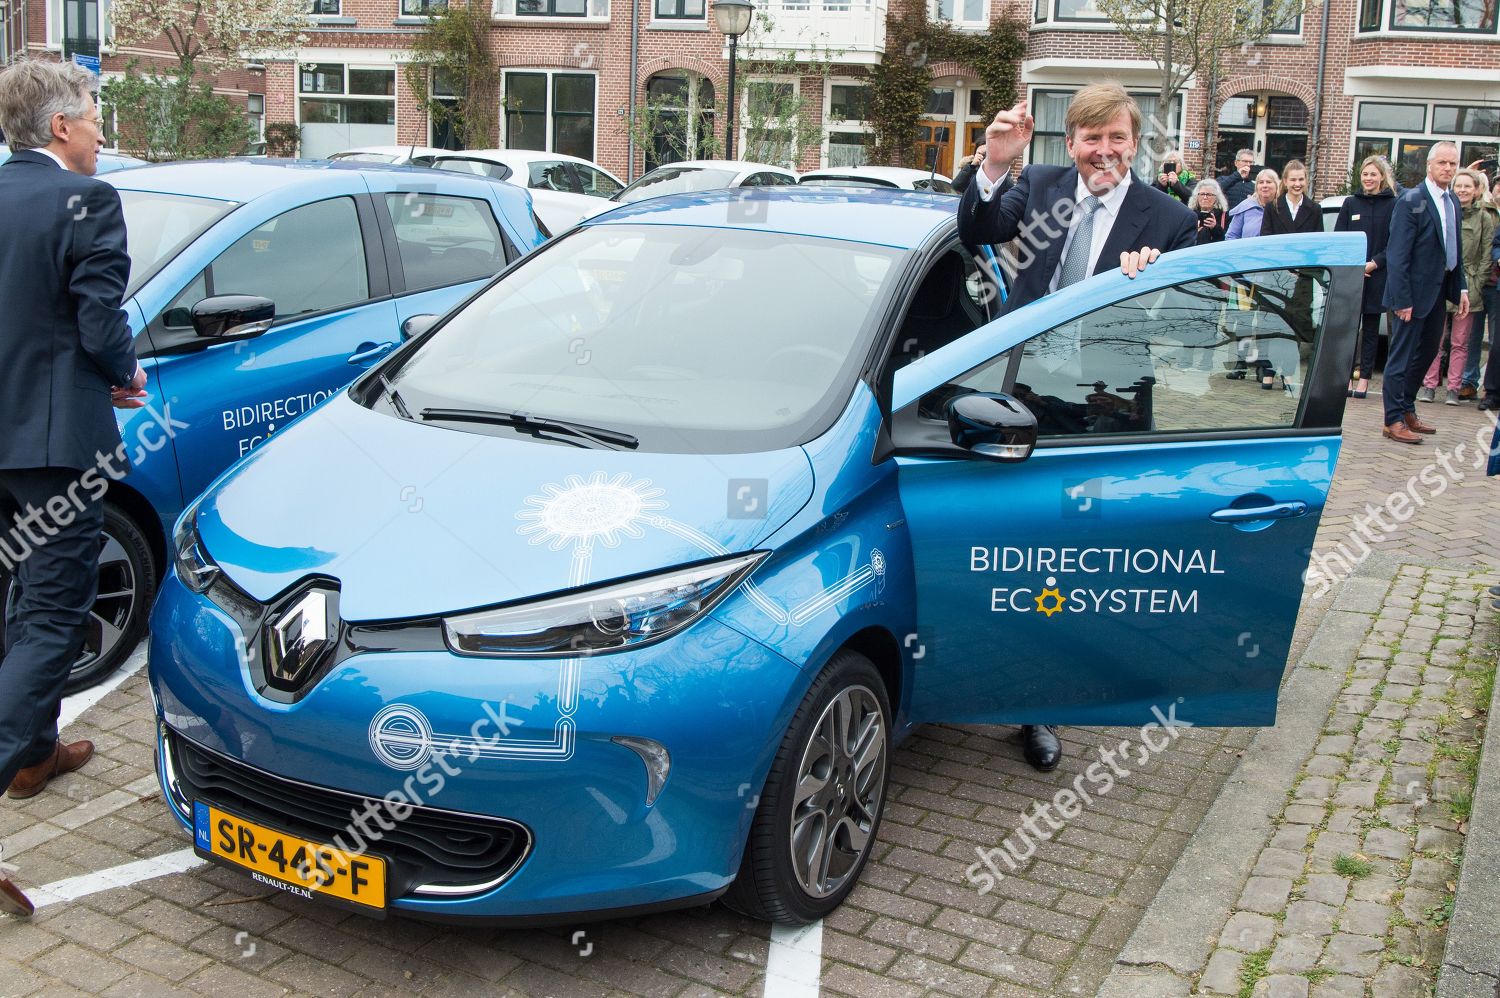 energy-and-mobility-system-launch-utrecht-netherlands-shutterstock-editorial-10163017s.jpg